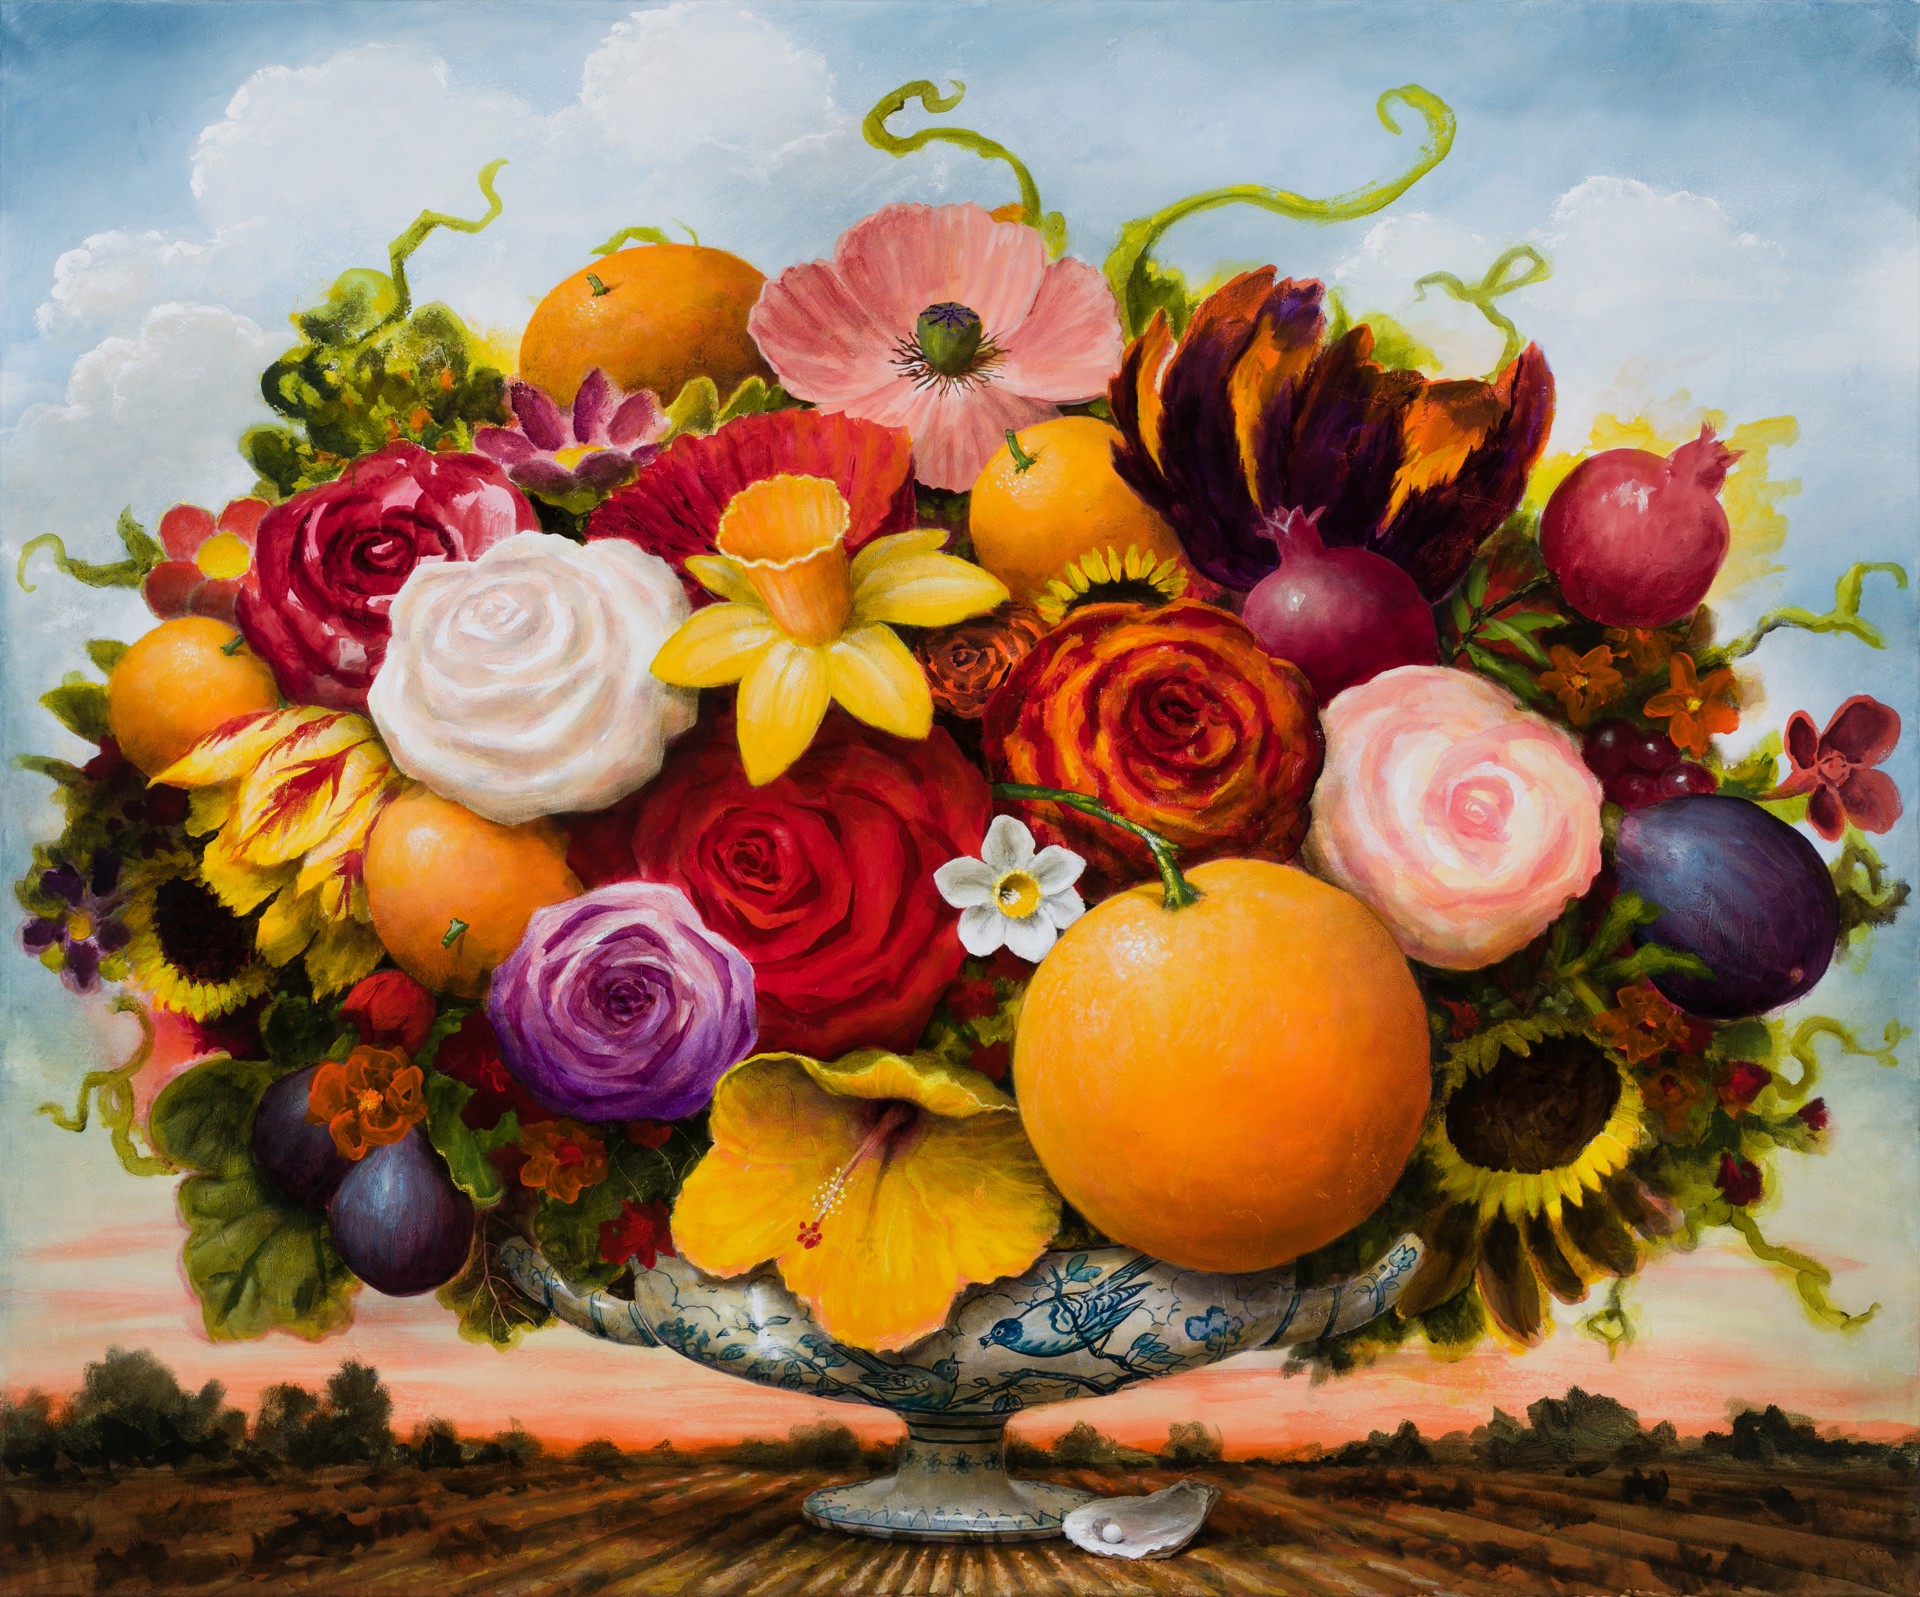 Arrangement with Unexpected Good Fortune by Kevin Sloan